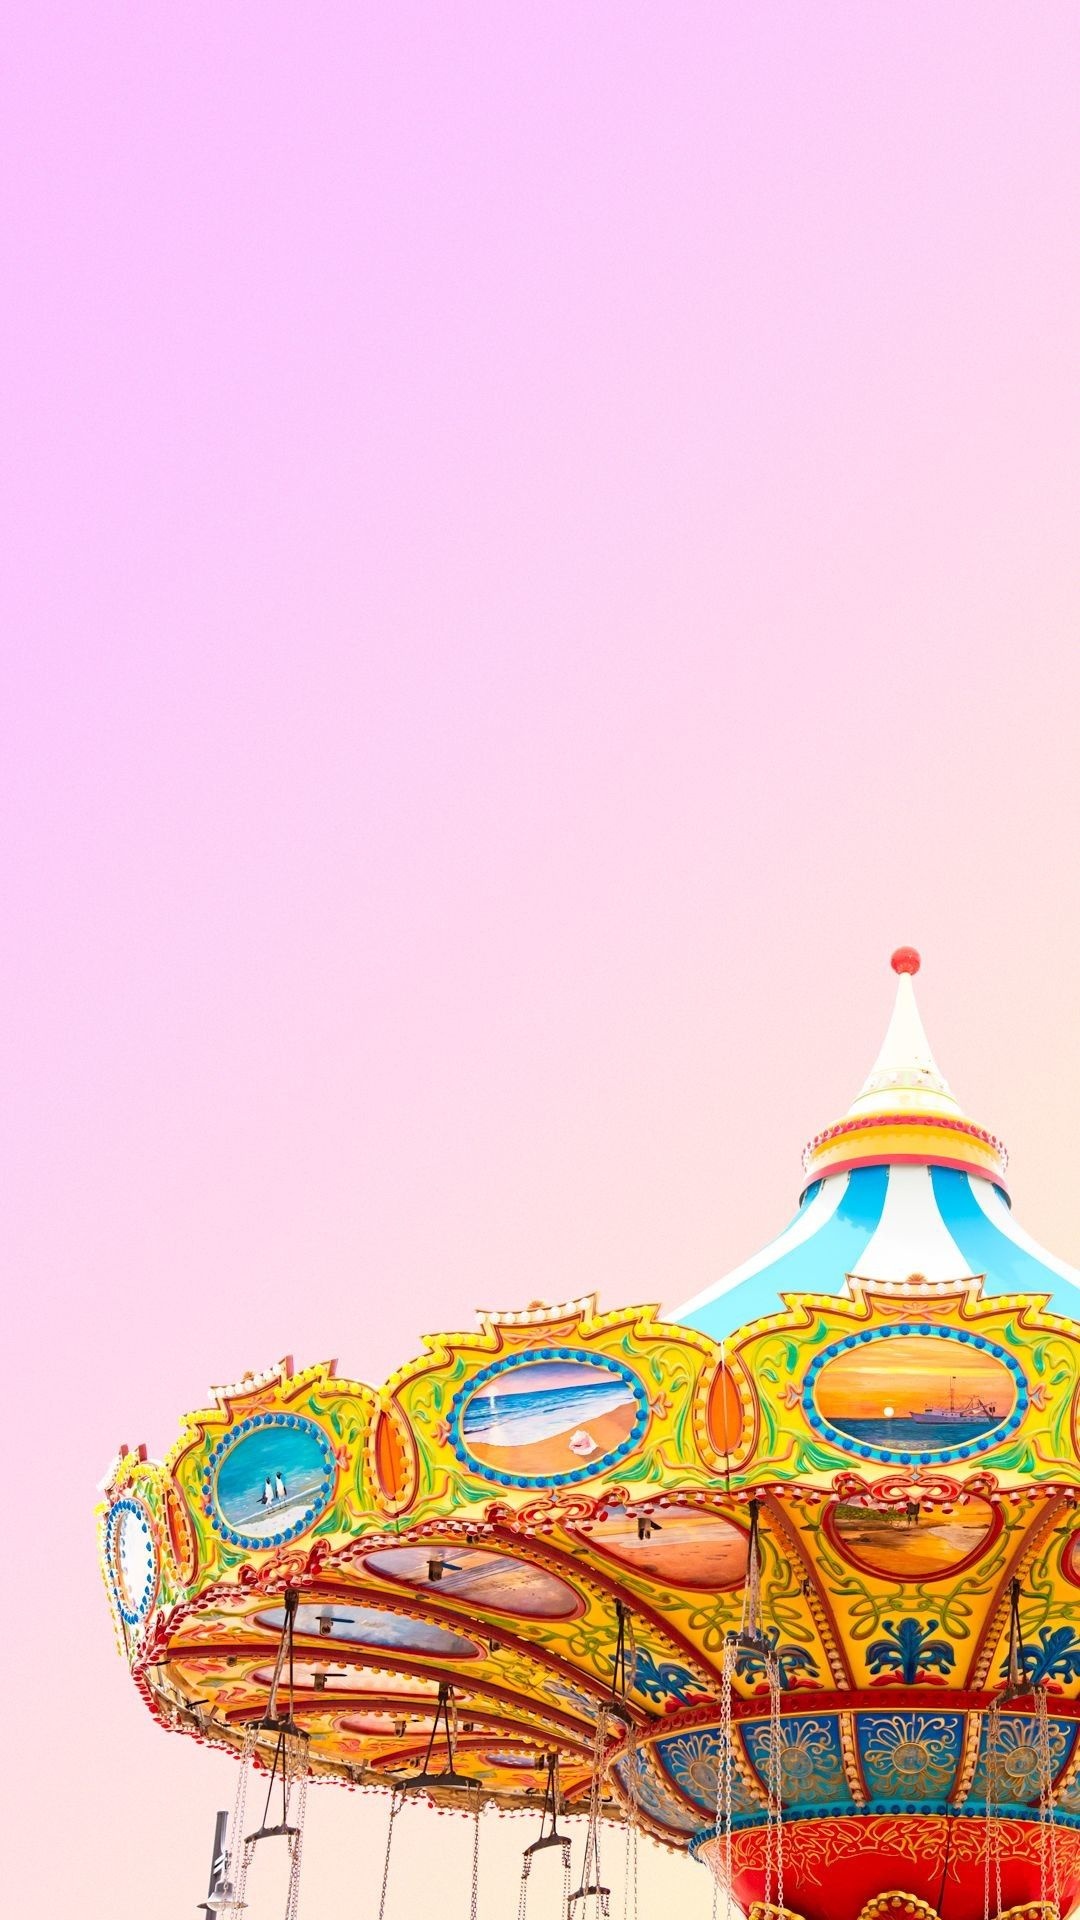 Merry-go-round, Colourful minimal, Beautiful backgrounds, 1080x1920 Full HD Handy